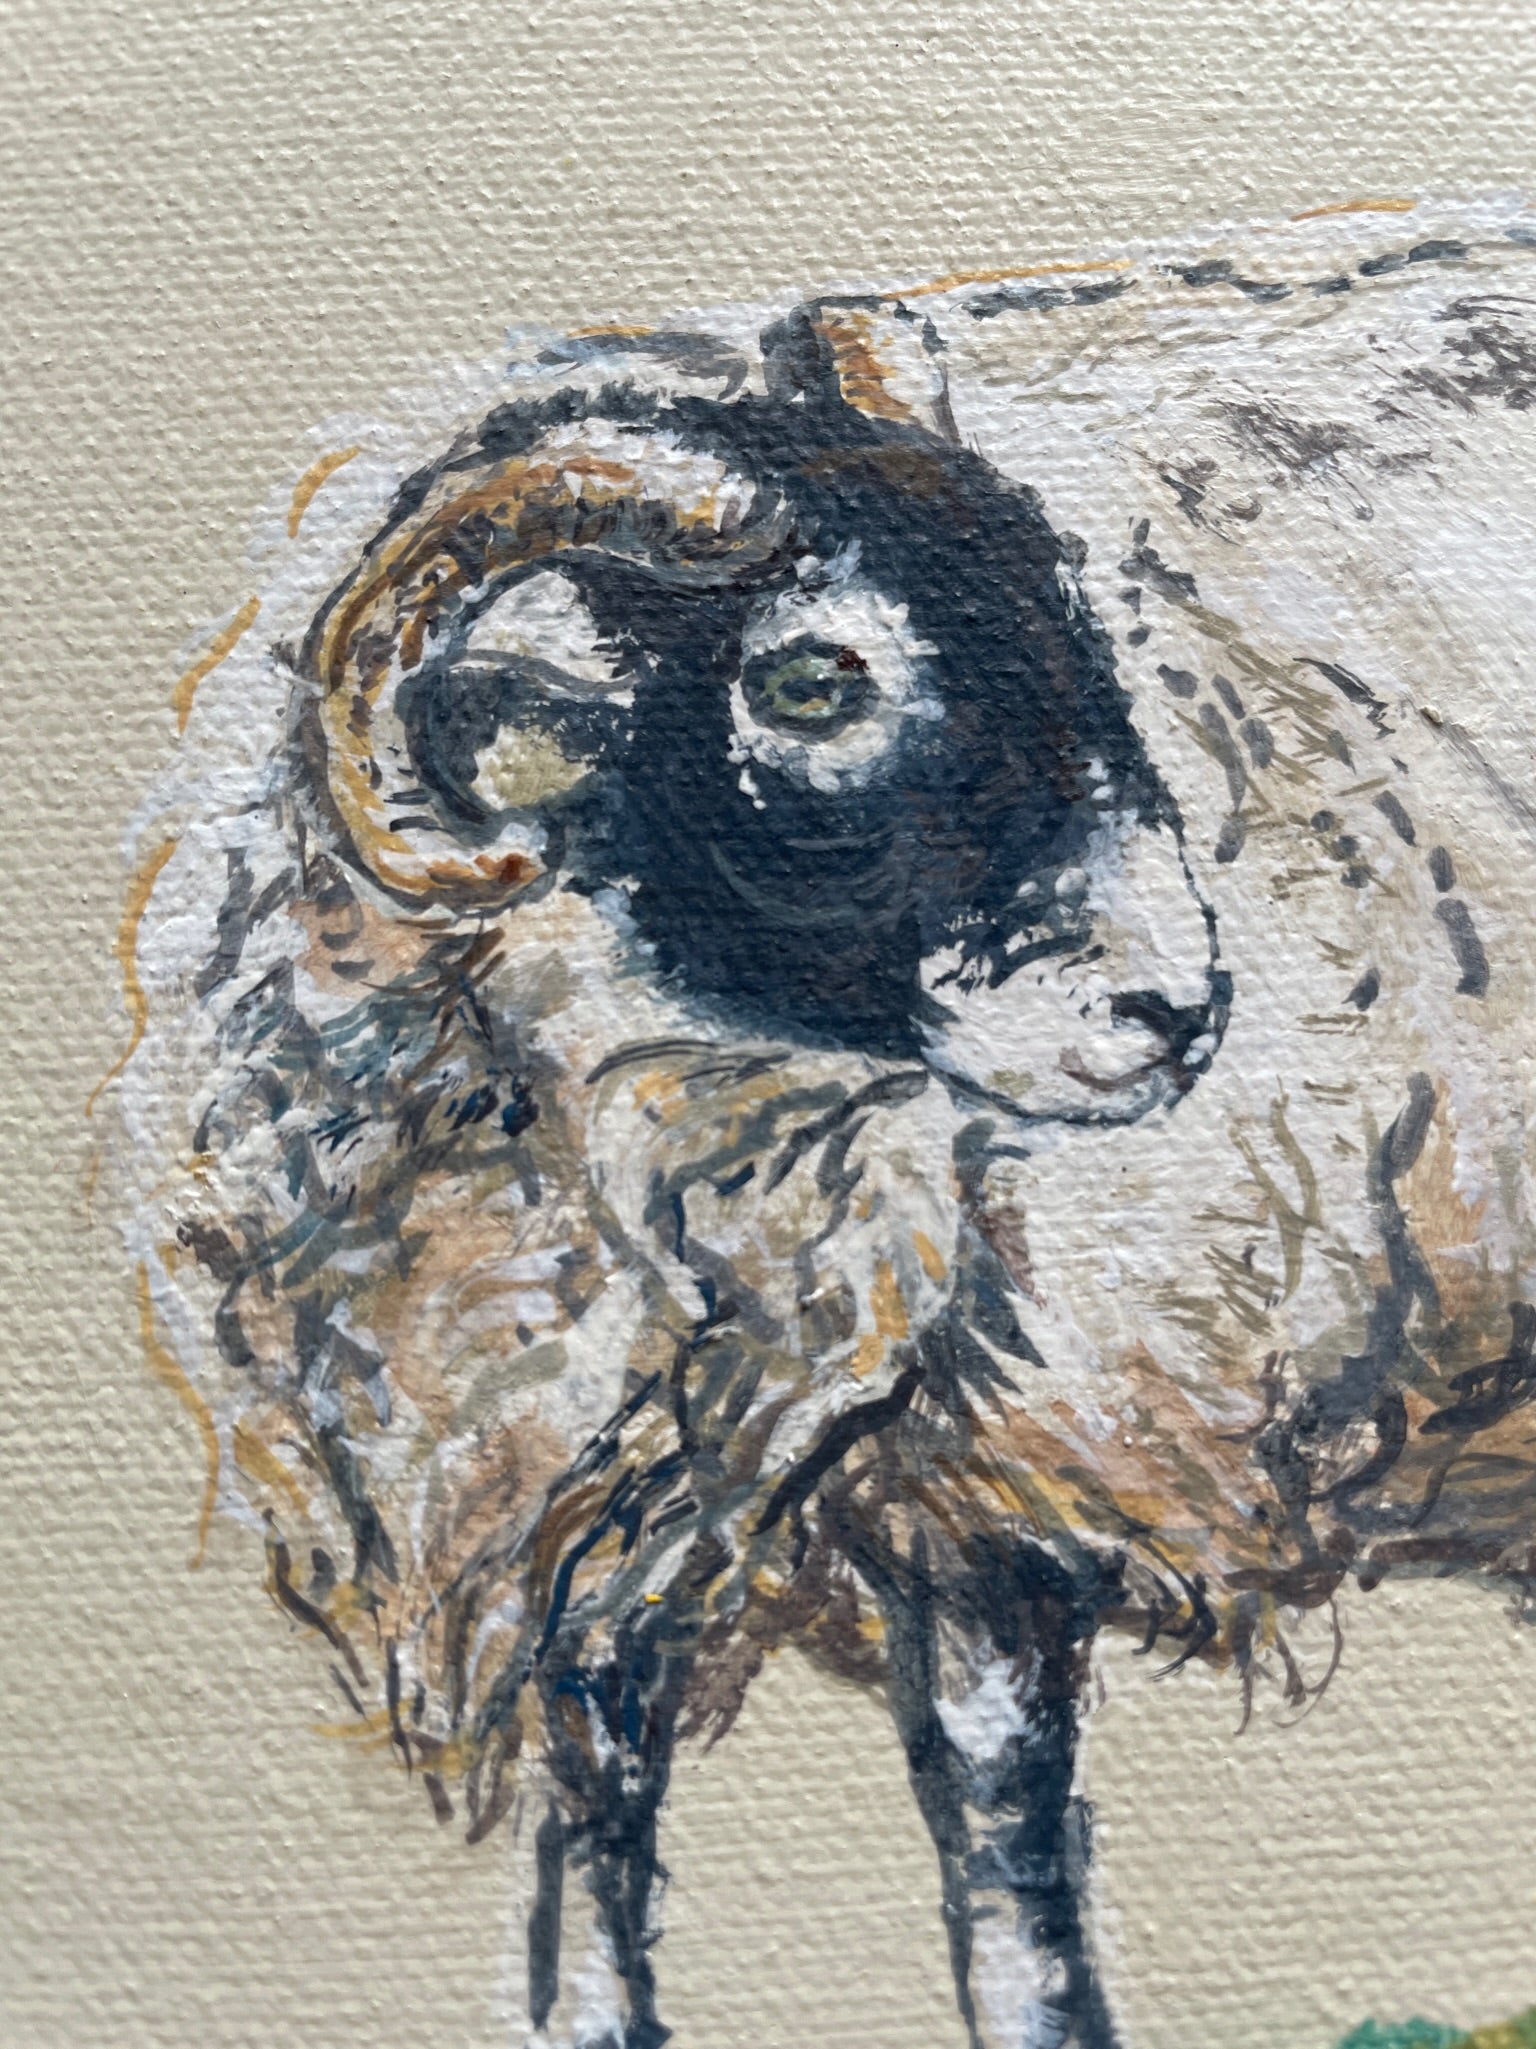 Swaledale Sheep - My mini paintings depict various countryside subjects painted on soft off-white backgrounds.